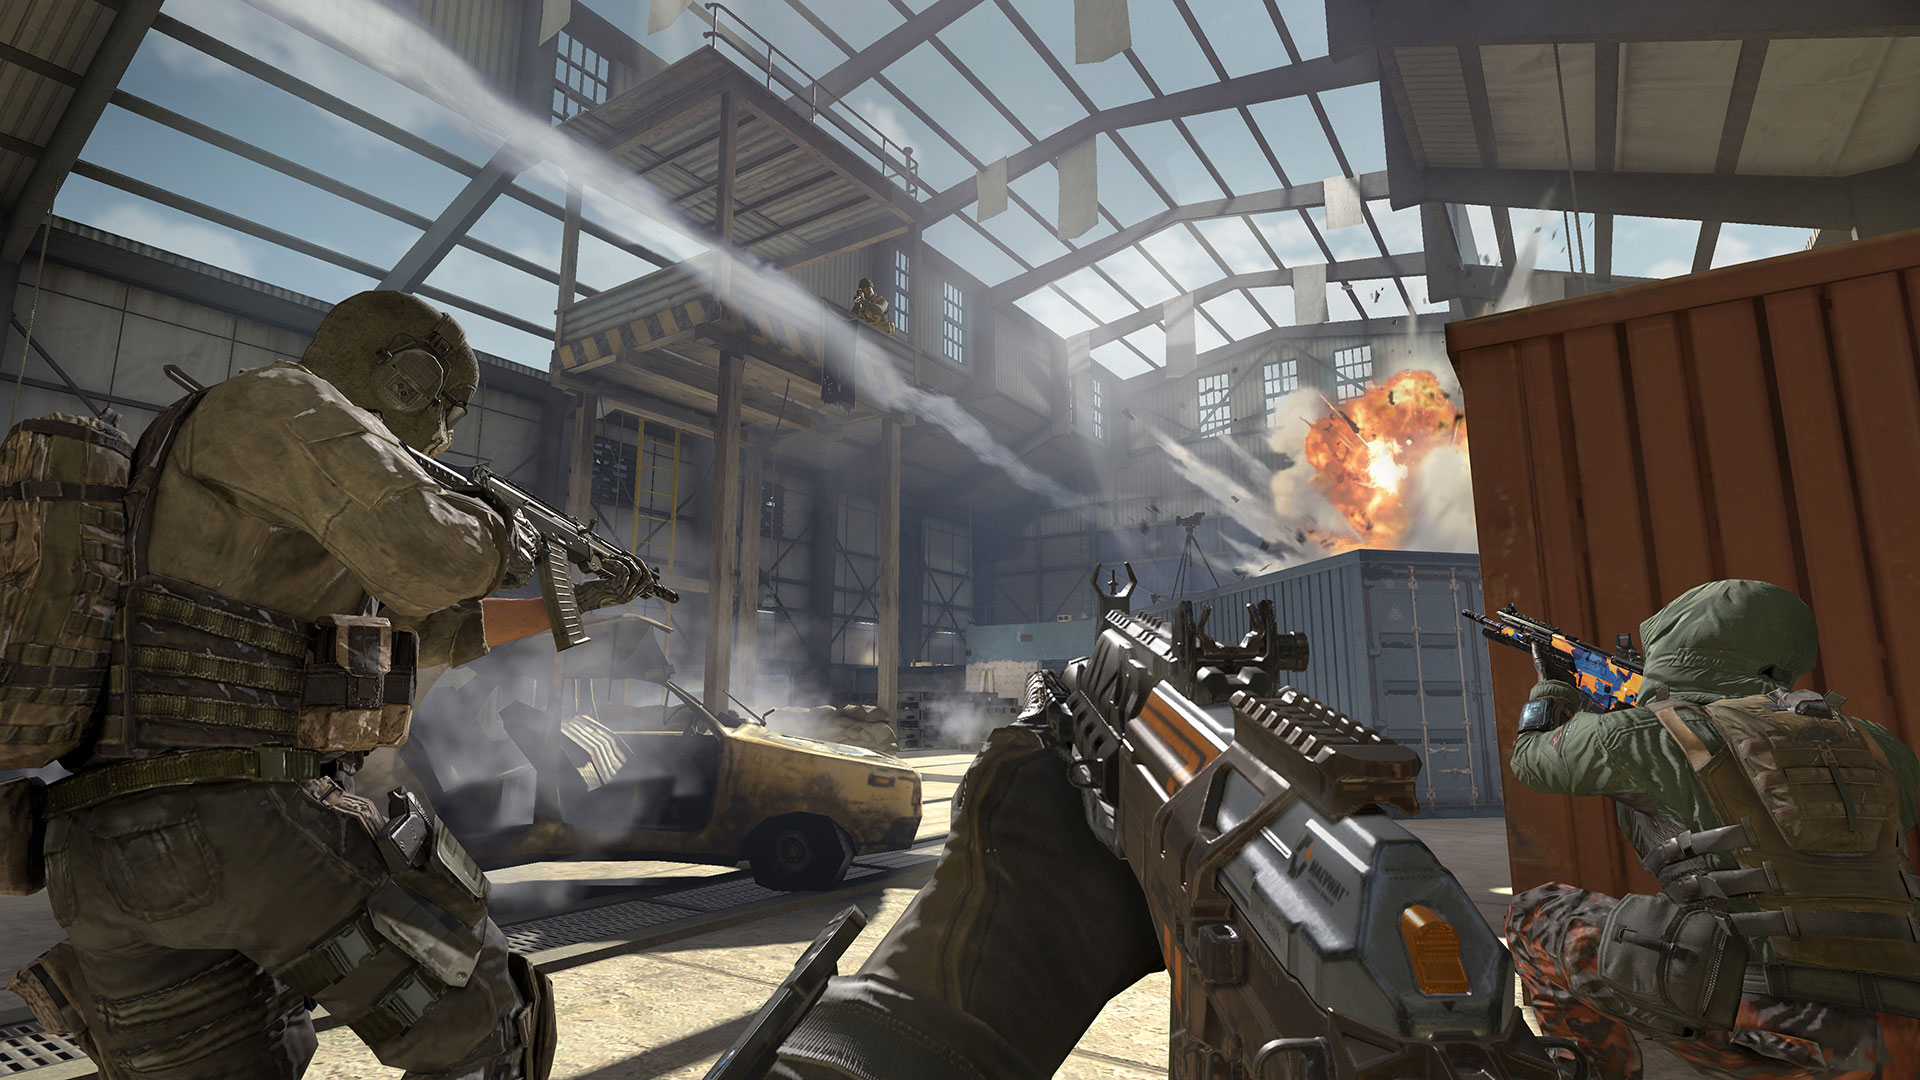 Call of Duty Mobile multiplayer: Tips and tricks to give you the